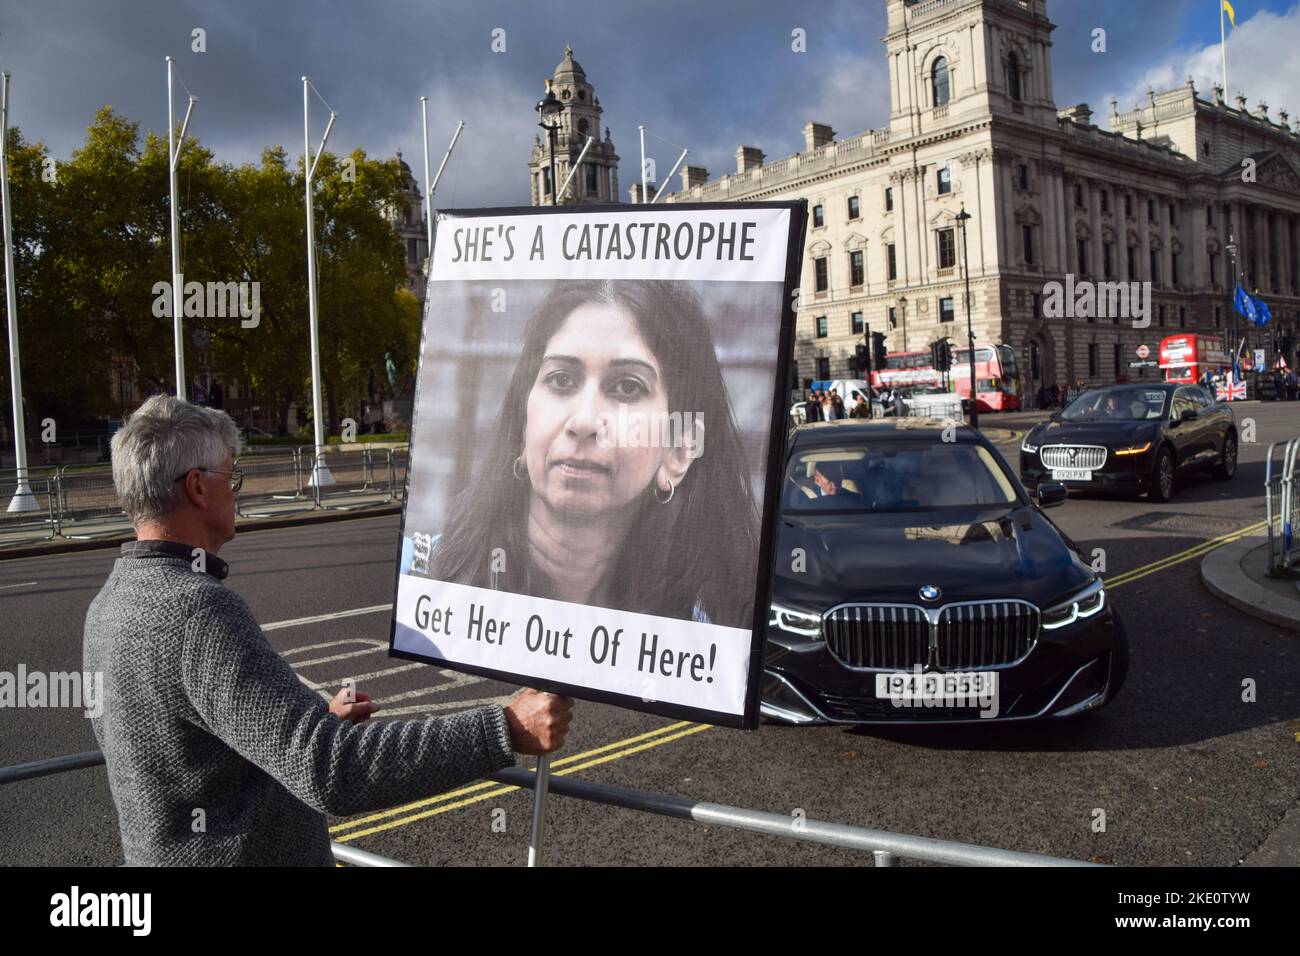 London, UK. 9th November 2022. A protester outside Parliament greets arriving officials with a placard calling for the removal of Home Secretary Suella Braverman. Anti-Tory Government portesters gathered in Westminster as Rishi Sunak faced Prime Minister's Questions. Credit: Vuk Valcic/Alamy Live News Stock Photo